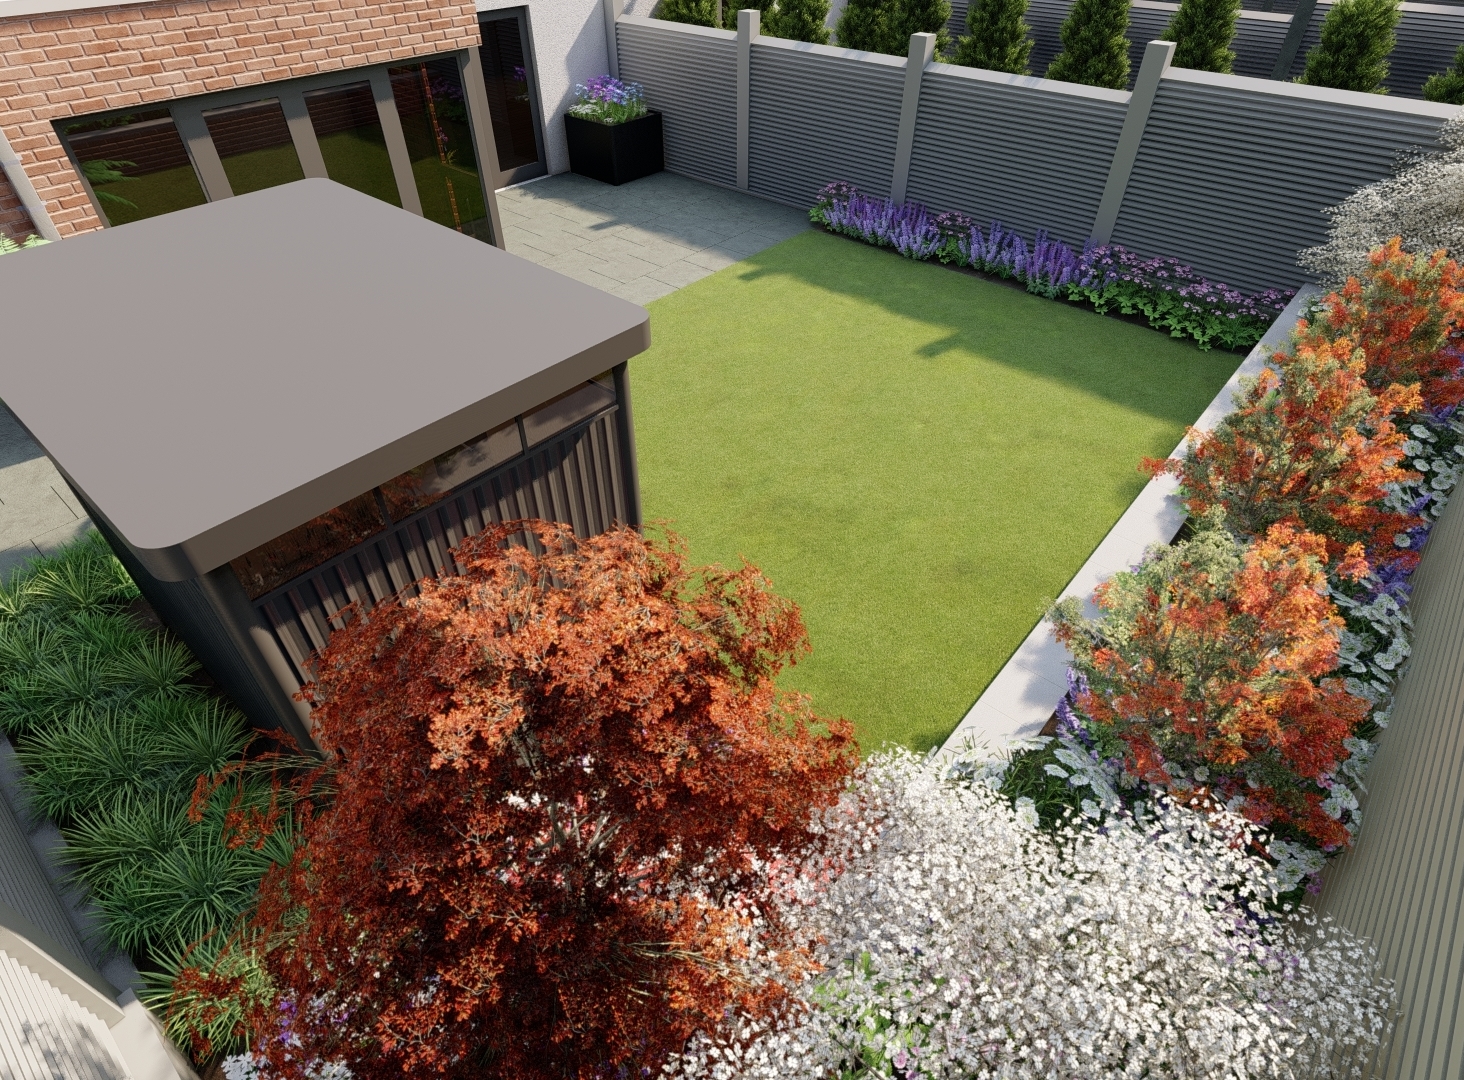 Design Visual for small family garden in Blackrock, Co Dublin featuring Biohort HighLine Shed, Bespoke Garden Fencing, sweeping Limestone pathway, synthetic grass area, Specimen trees and Limestone Patio